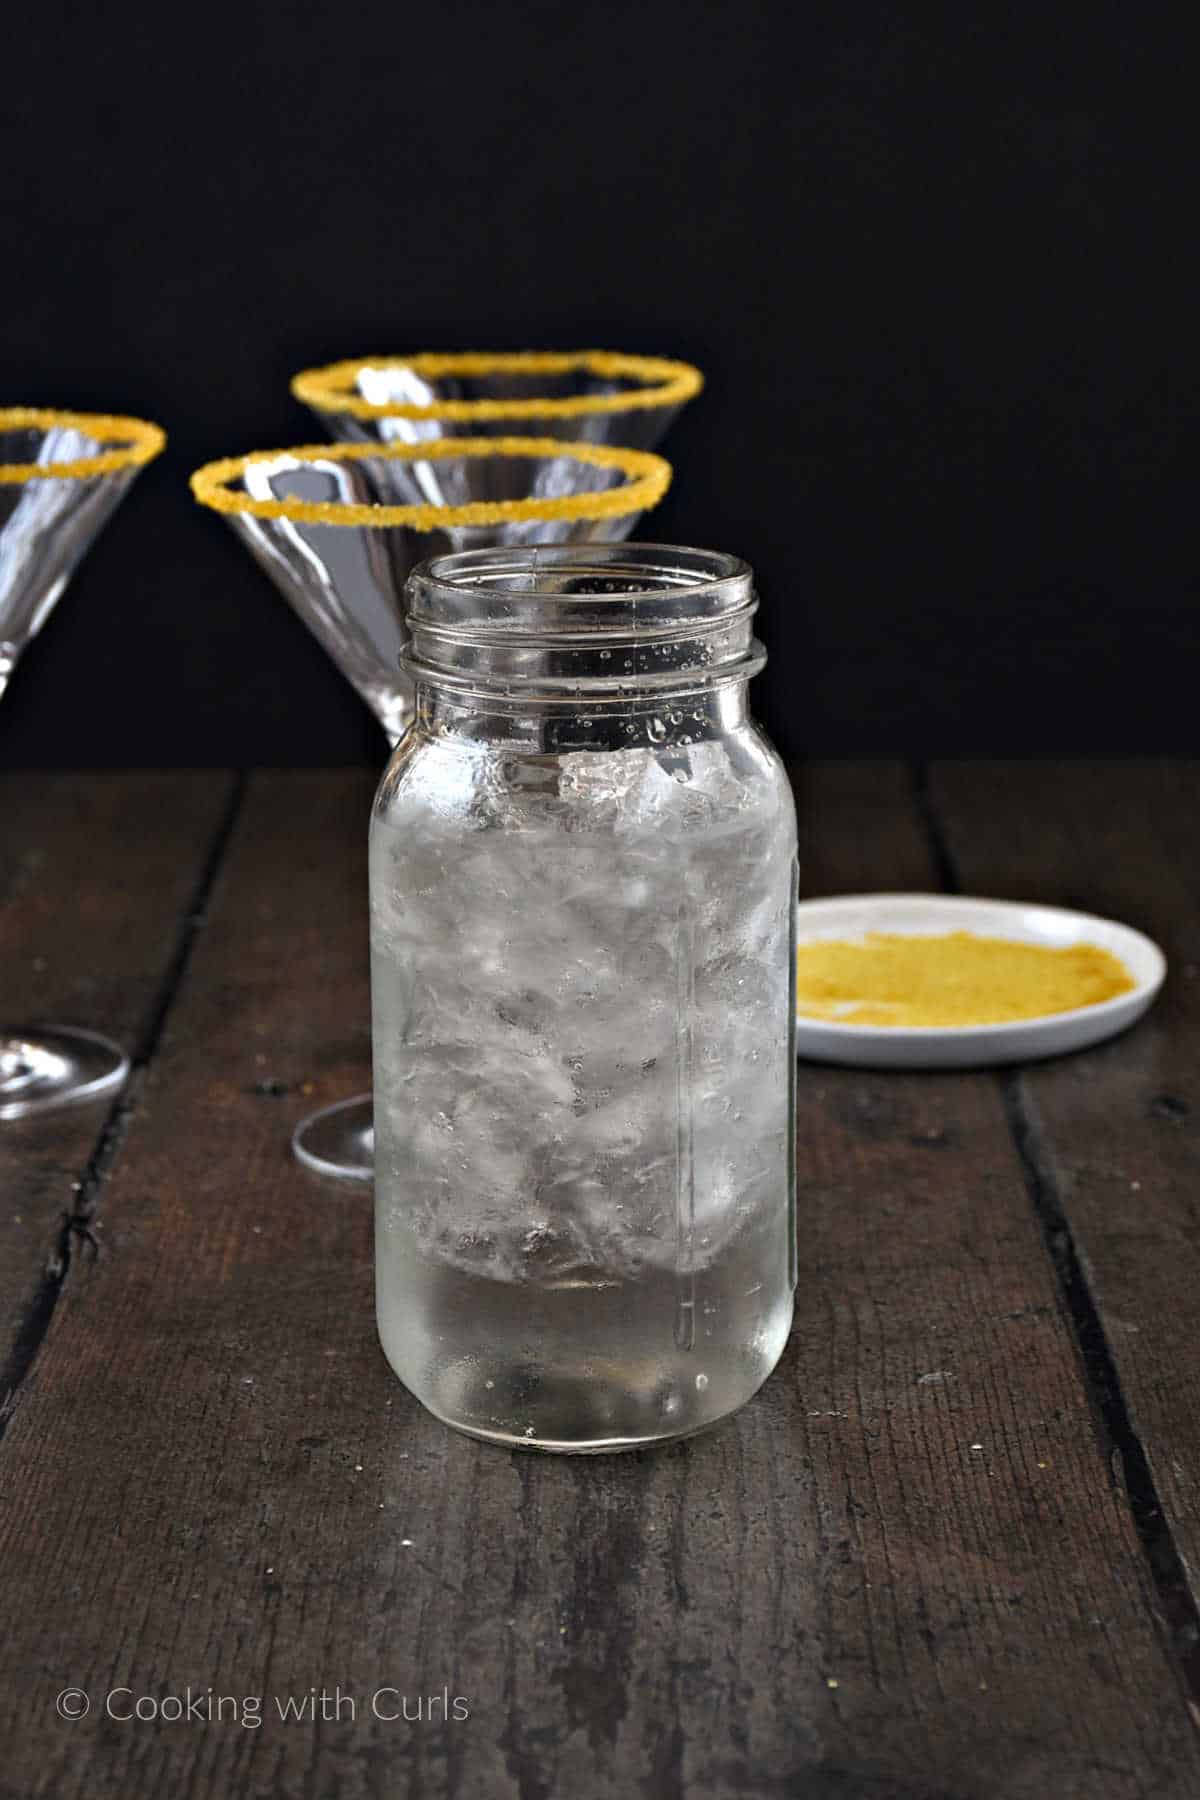 A glass cocktail shaker filled with ice, caramel vodka, apple vodka, and butterscotch schnapps with three martini glasses in the background.